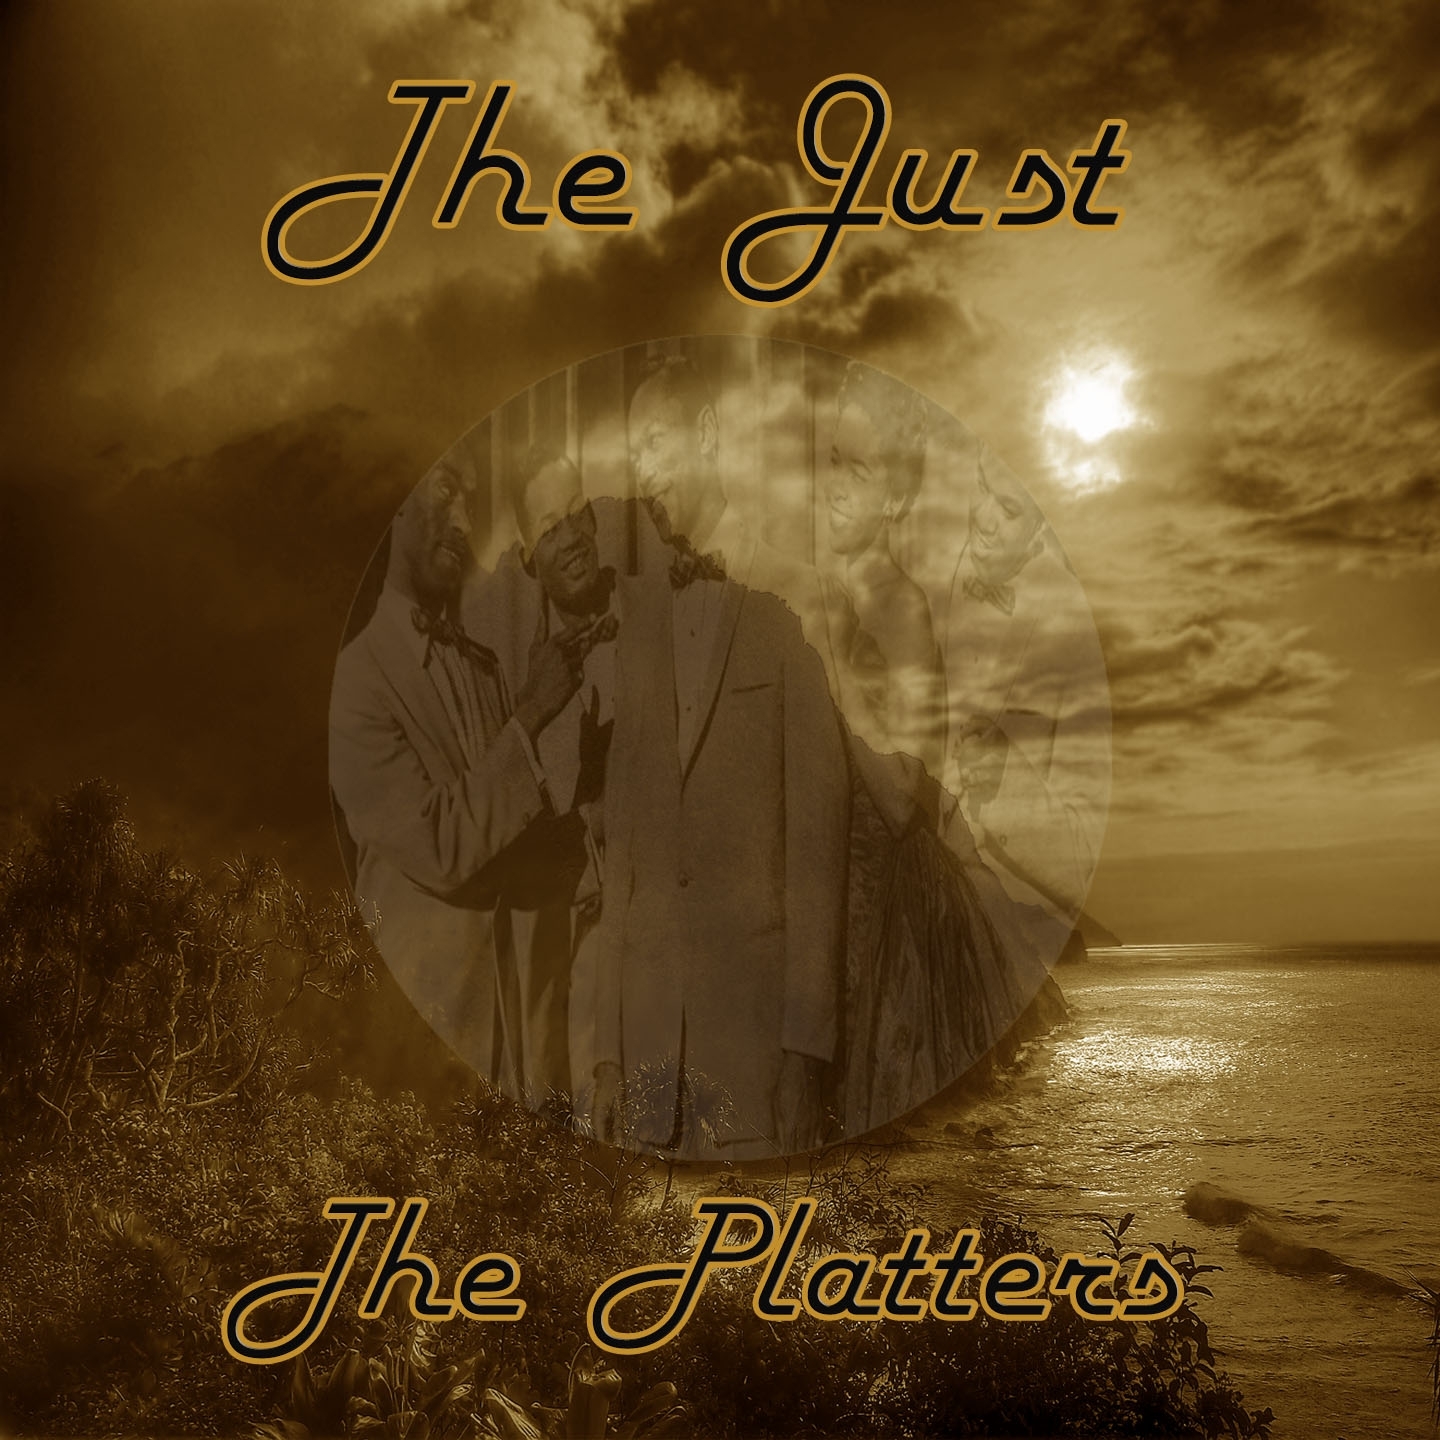 The Just the Platters